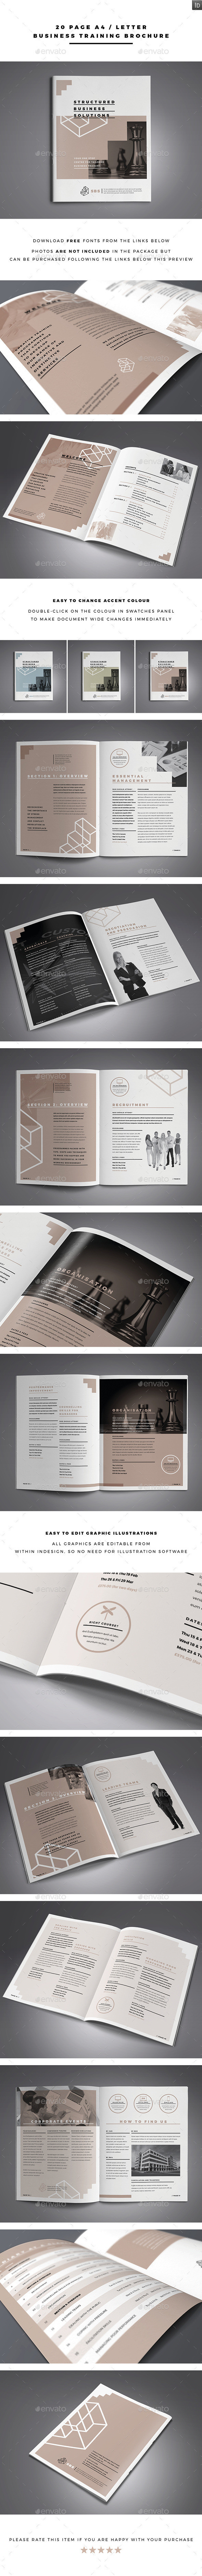 Preview business training brochure